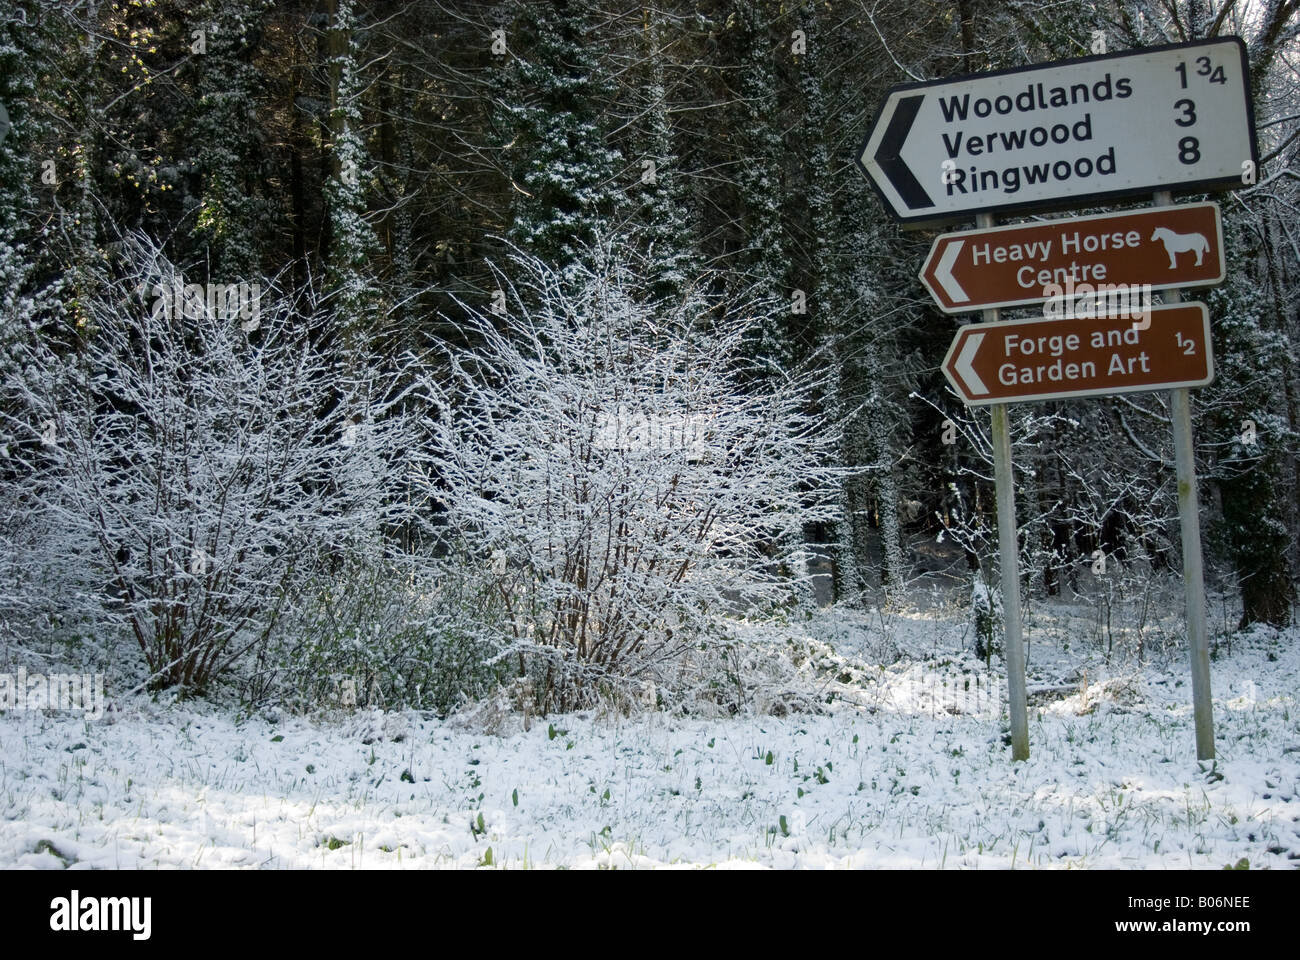 Roadsigns in the snow - New Forrest, Hampshire, England Stock Photo